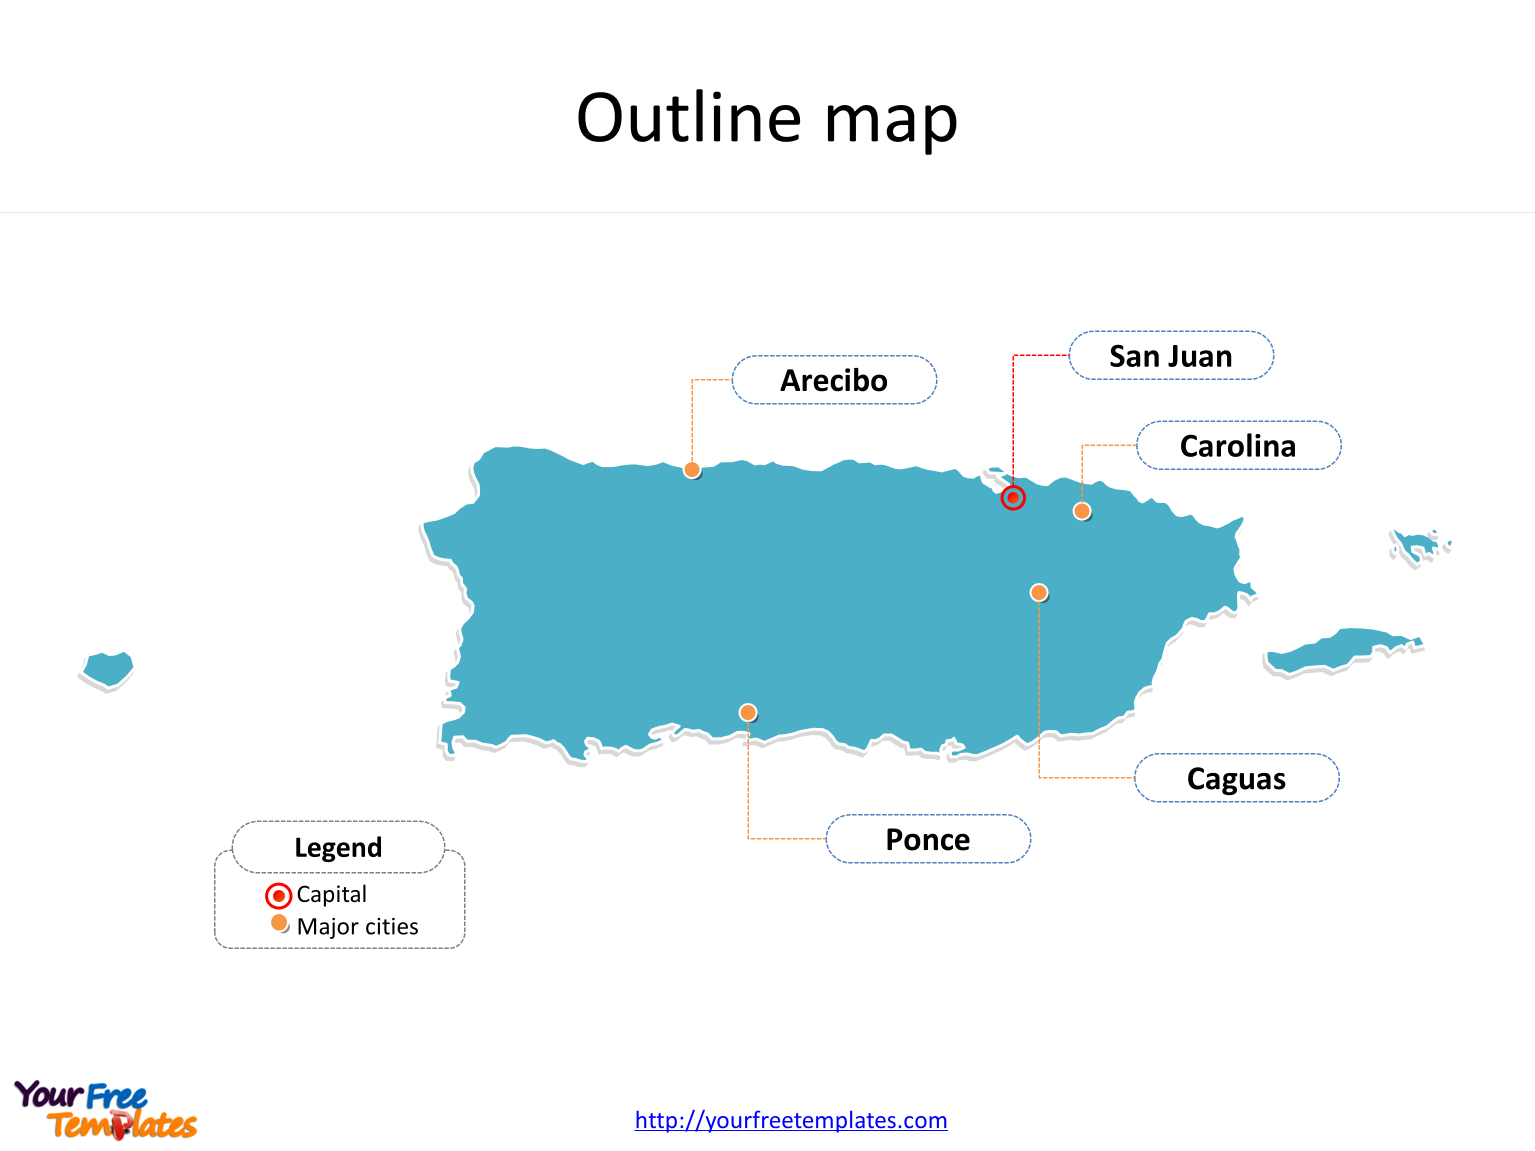 State of Puerto Rico map with outline and cities labeled on the Puerto Rico maps PowerPoint templates